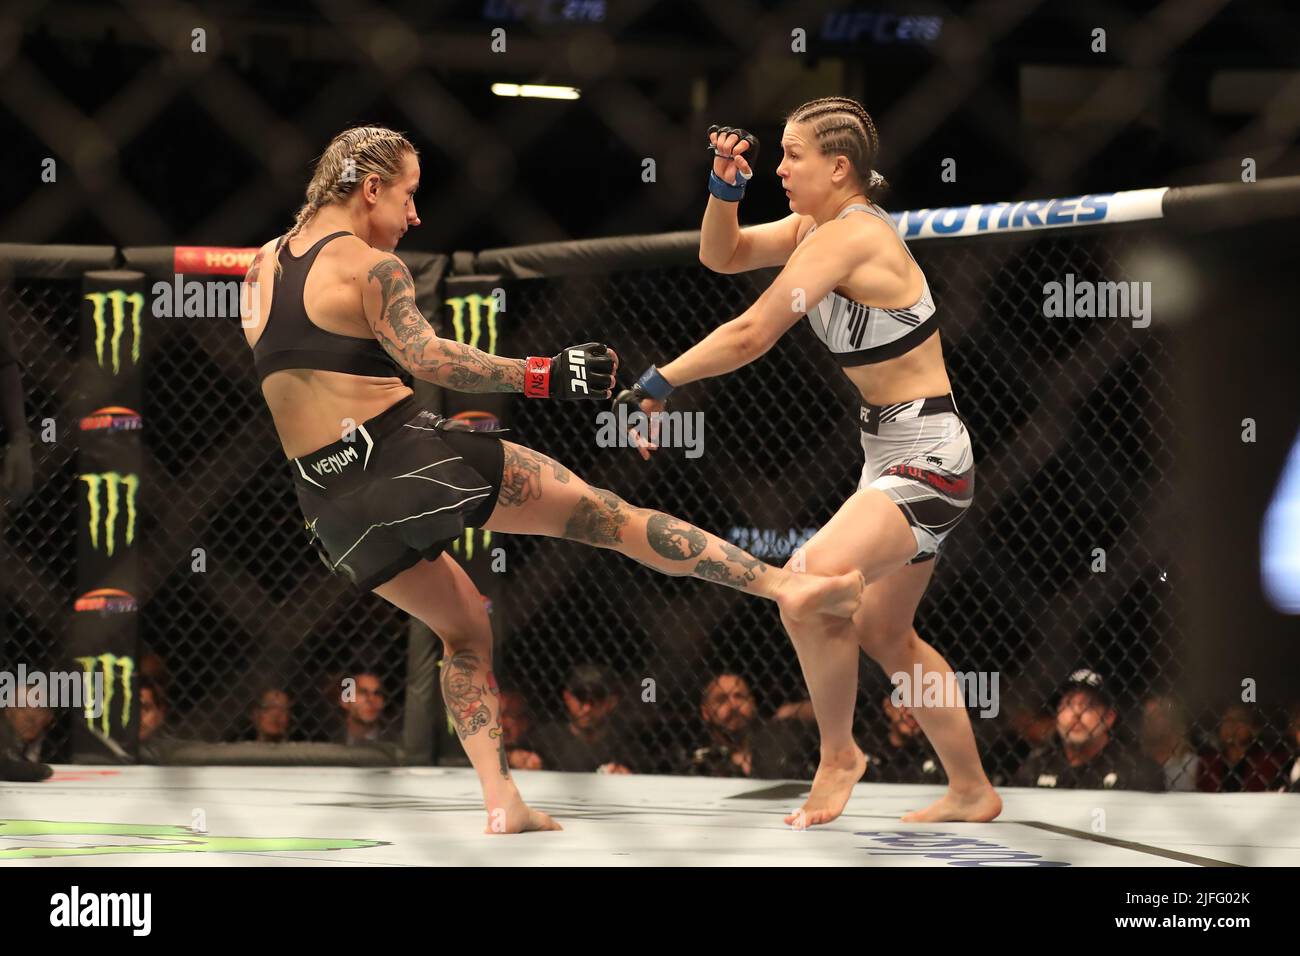 LAS VEGAS, NV - JULY 2: (L-R) Jessica-Rose Clark kicks Julija Stoliarenko in their Women’s Bantamweight bout at UFC 276 at the T-Mobile Arena on July 2, 2022 in Las Vegas, Nevada, United States.(Photo by Alejandro Salazar/PxImages) Stock Photo